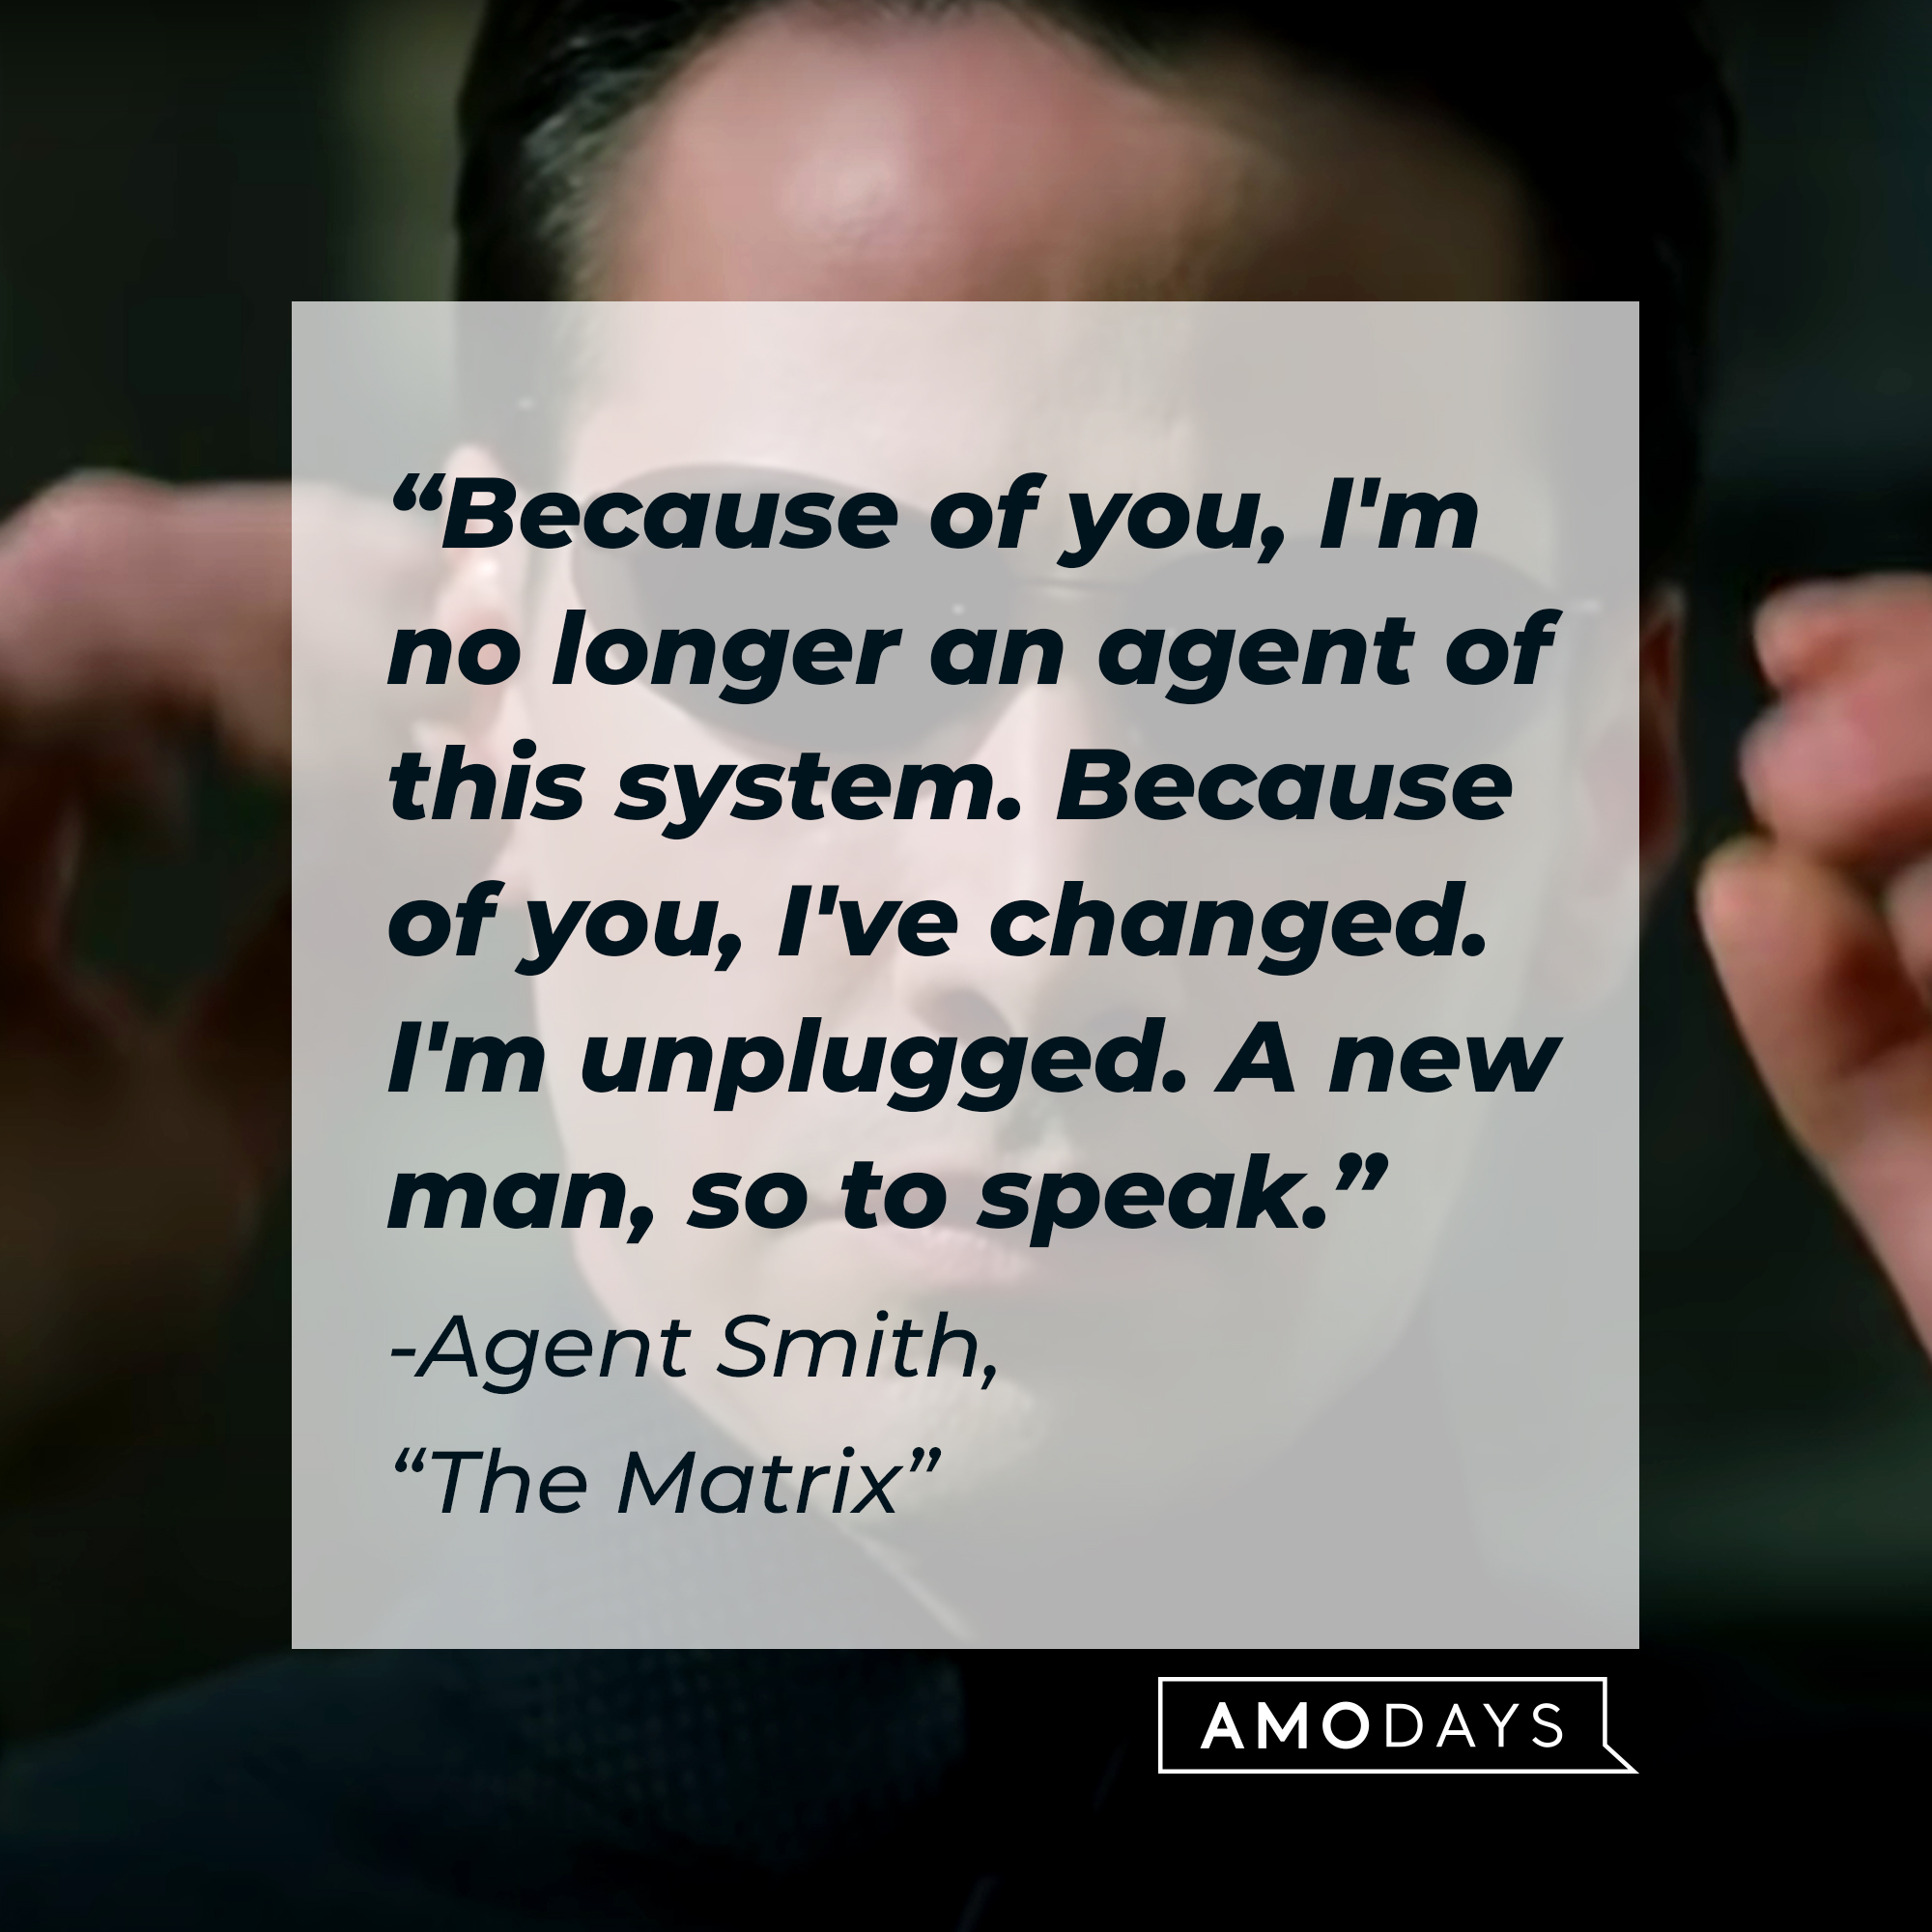 Agent Smith with his quote: "Because of you, I'm no longer an agent of this system. Because of you, I've changed. I'm unplugged. A new man, so to speak." | Source: Facebook.com/TheMatrixMovie